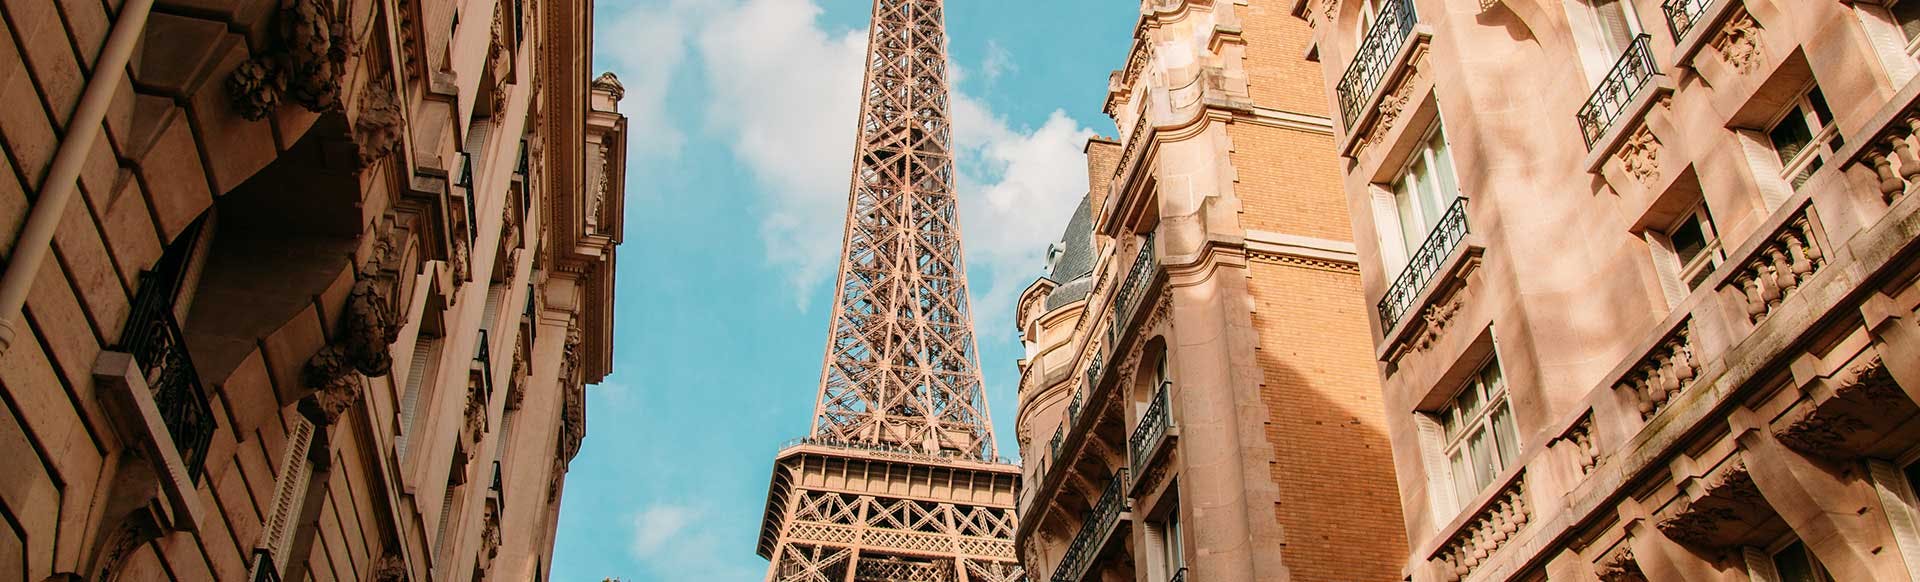 Search Hotels in Paris